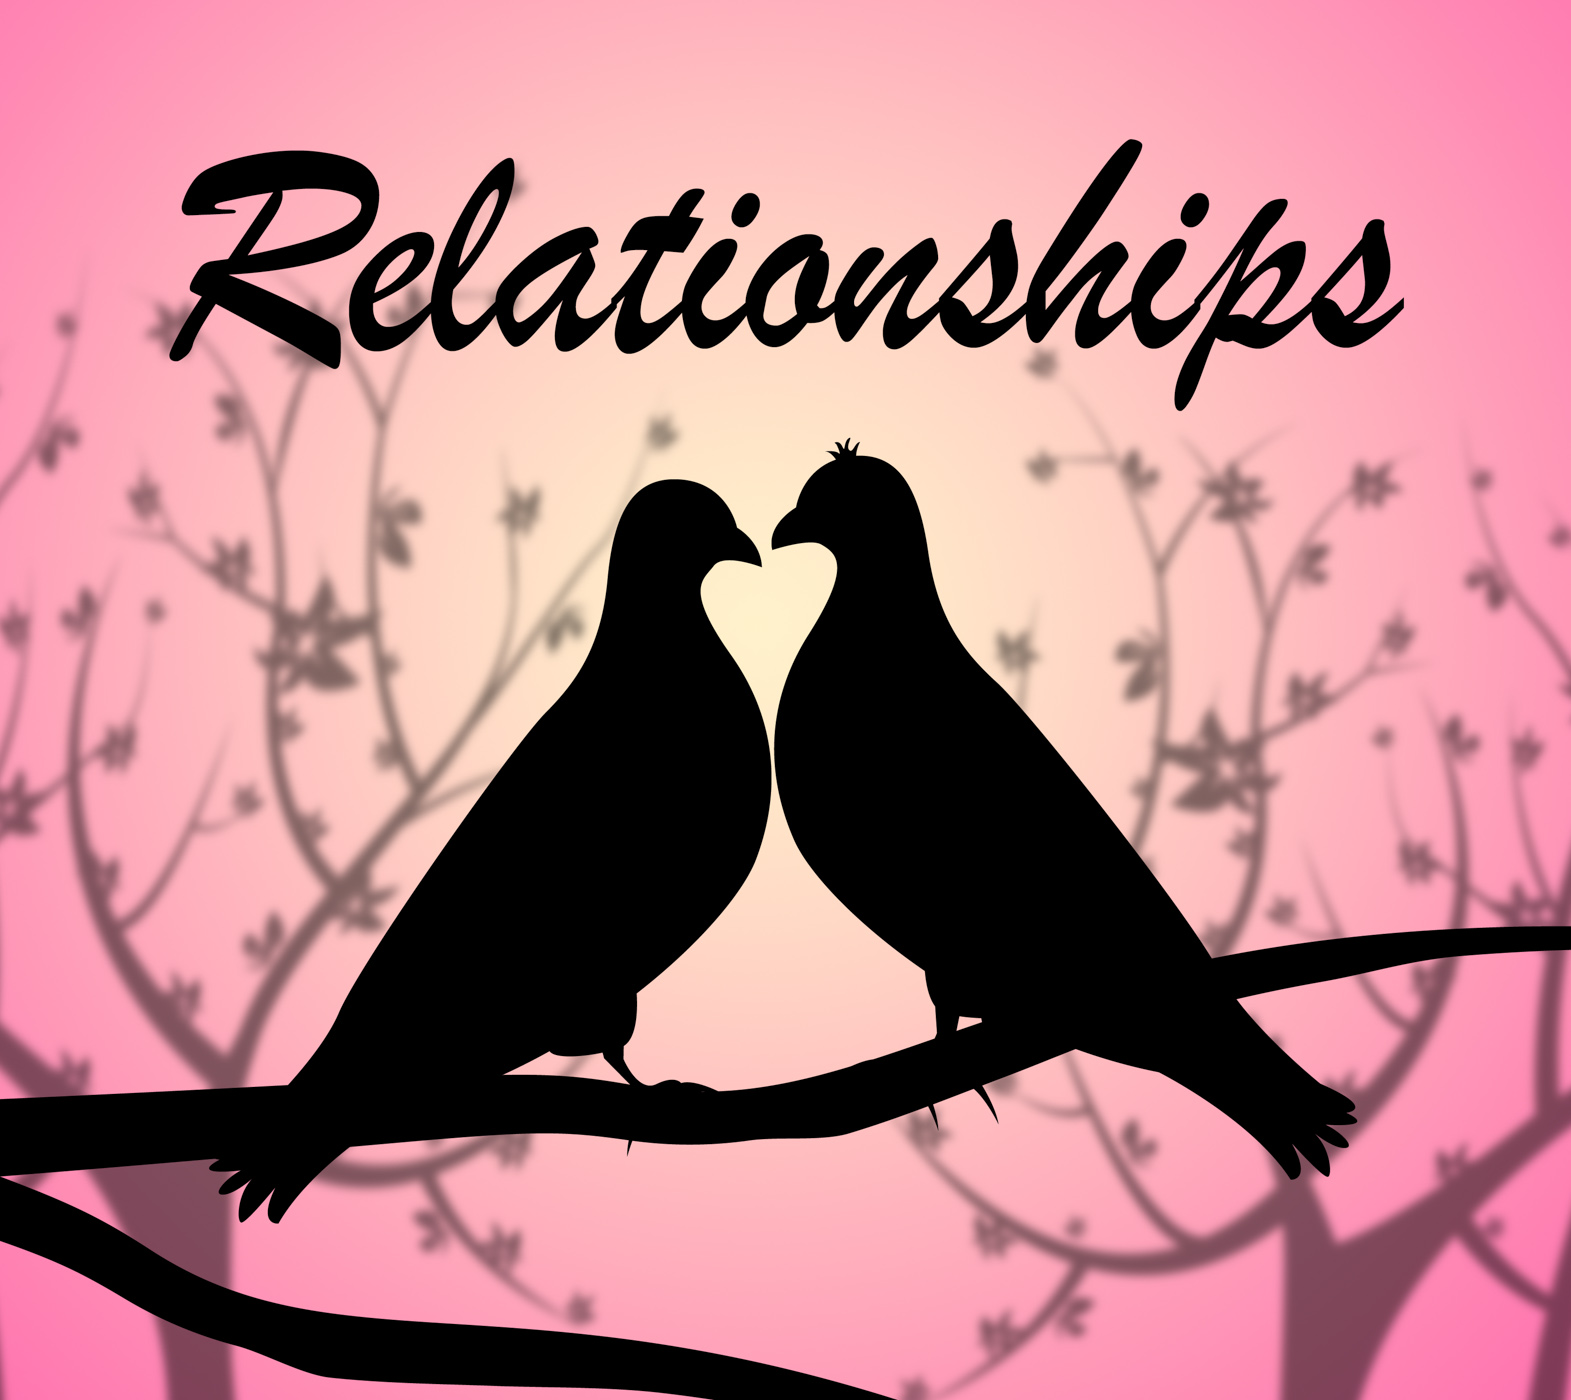 Relationships doves shows find love and affection photo